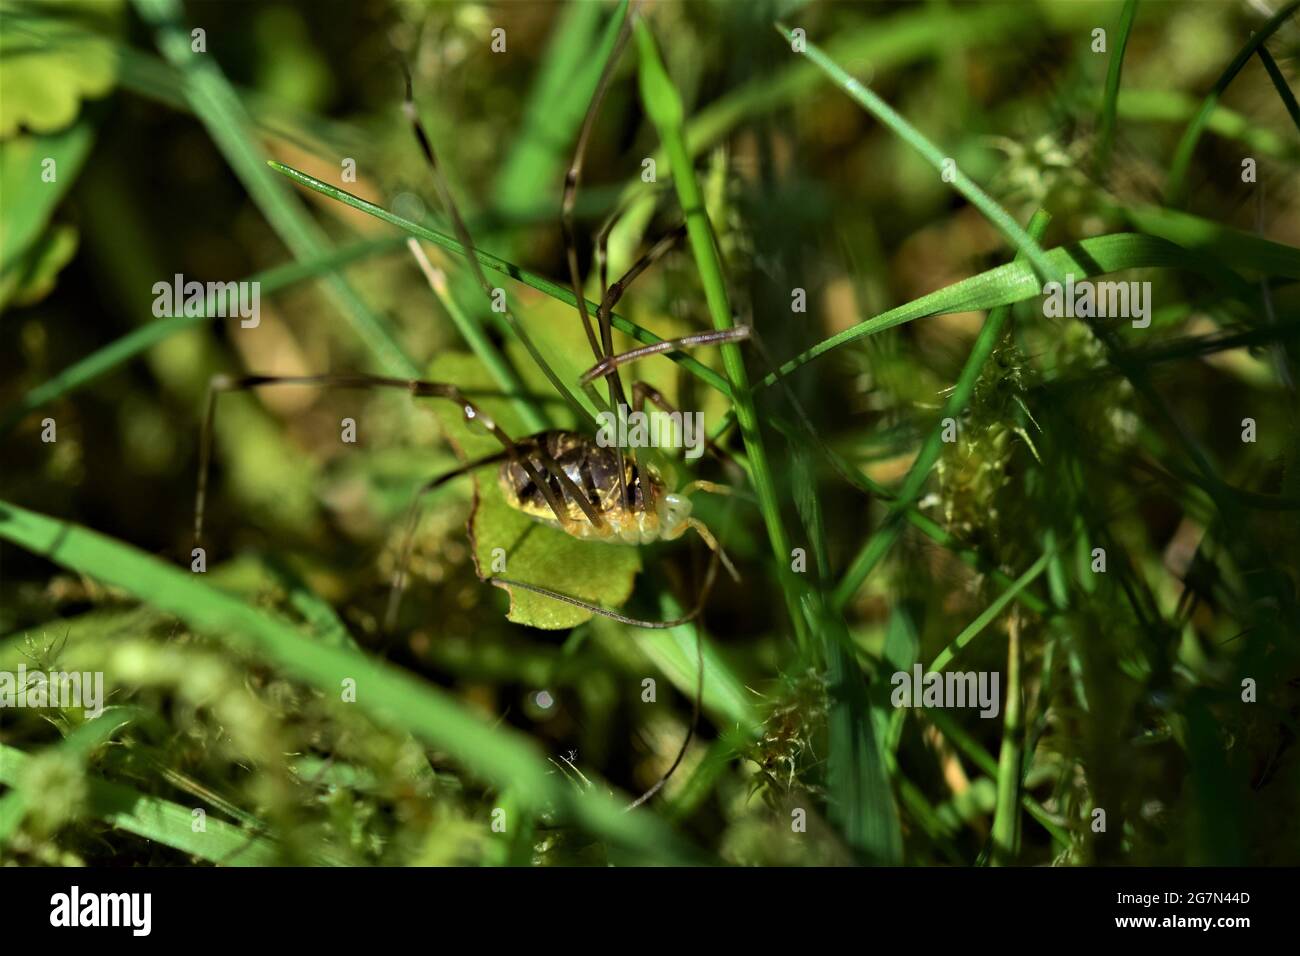 Brown spider with long legs in the lawn Stock Photo